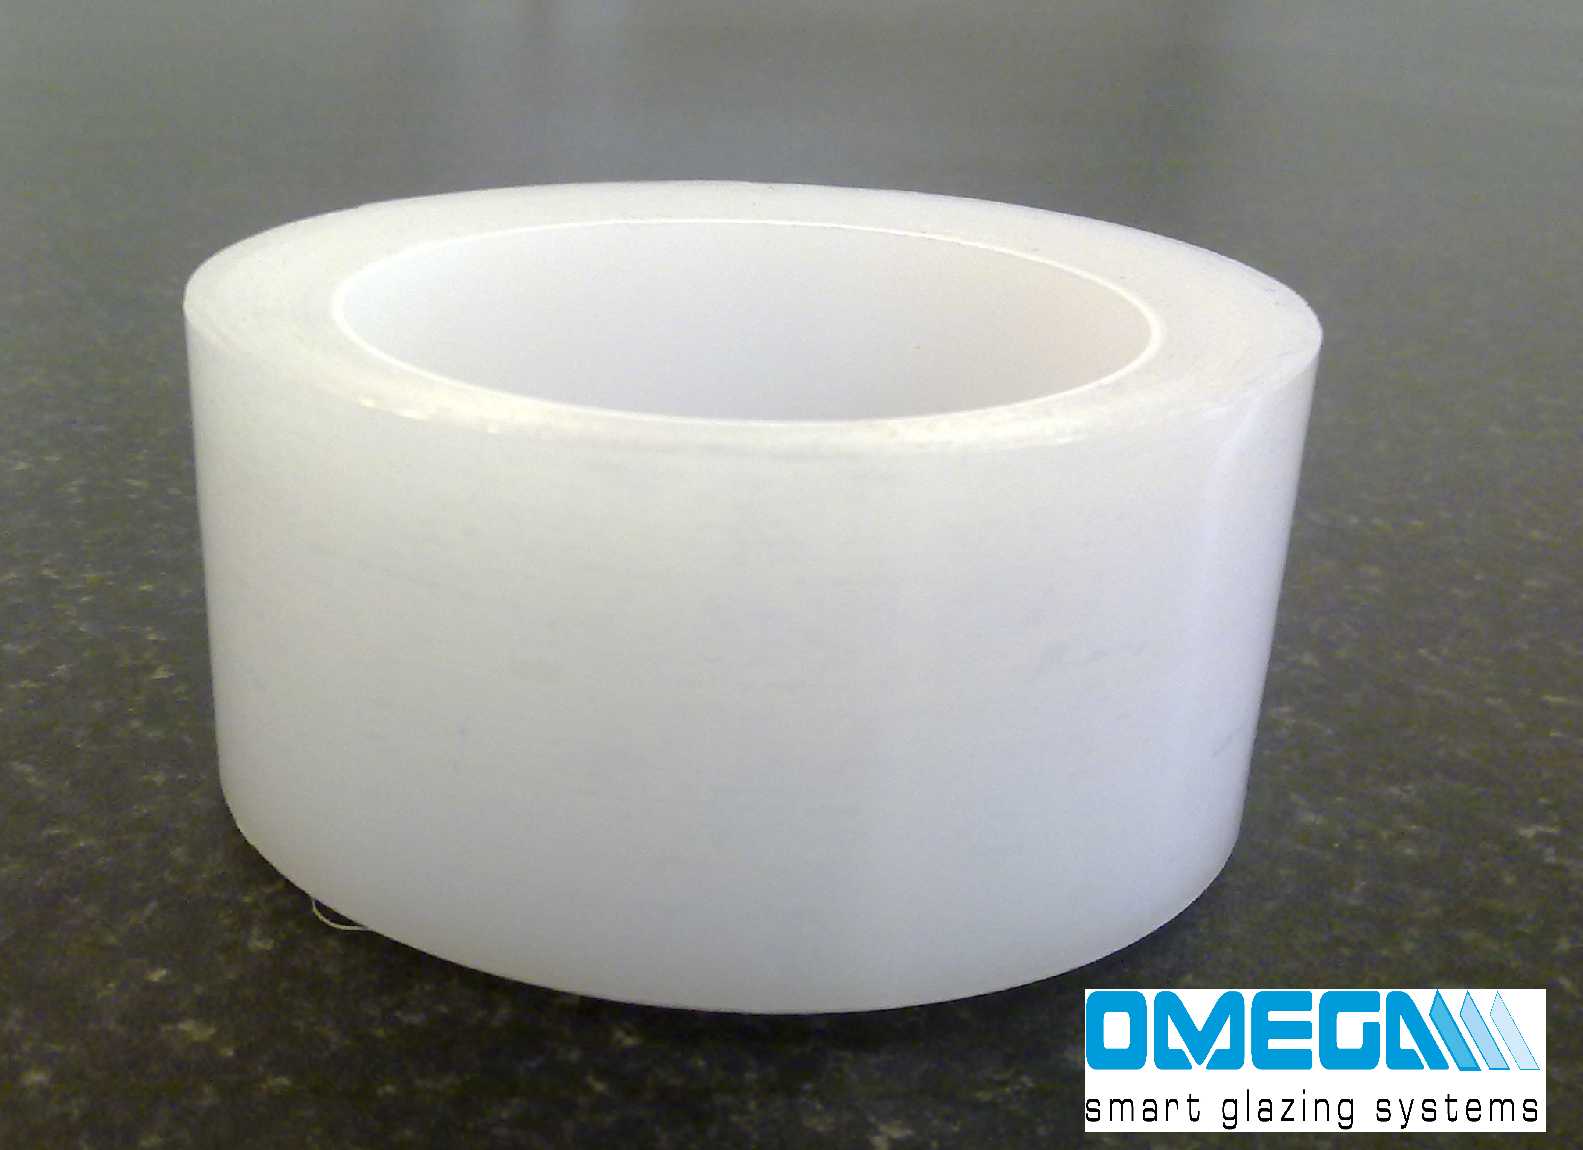 Polythene and glazing repair  tape, 25M roll